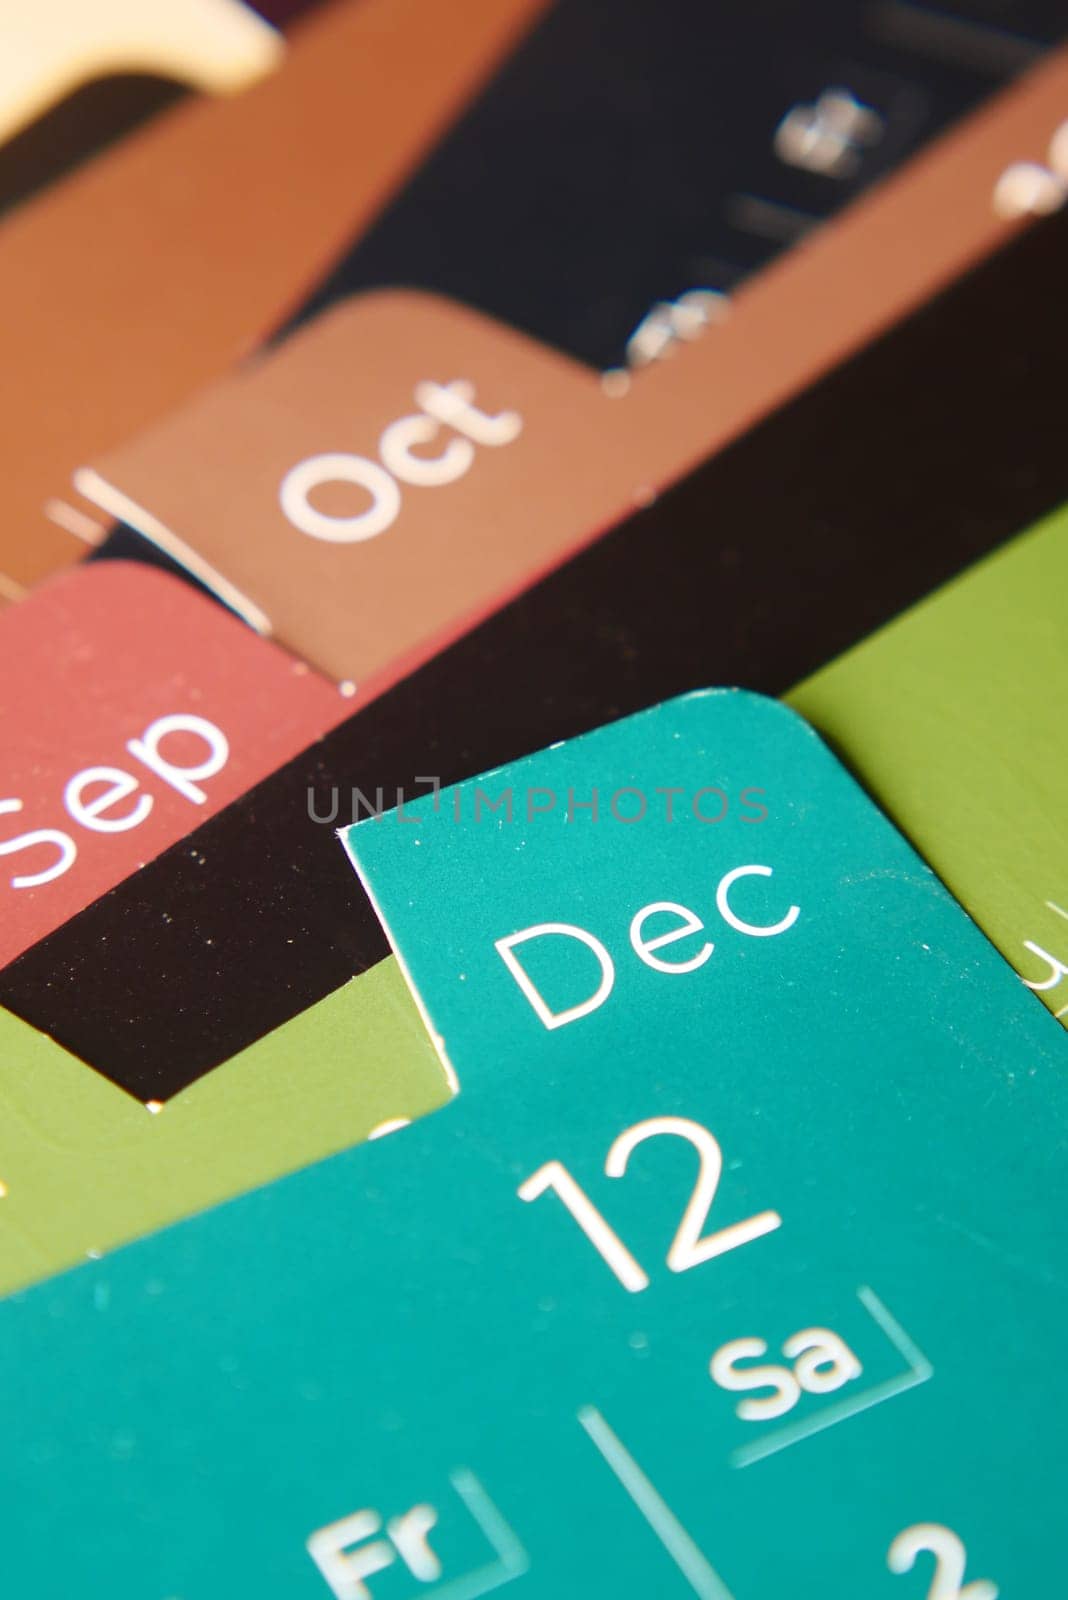 detail shot of a calendar on table,.